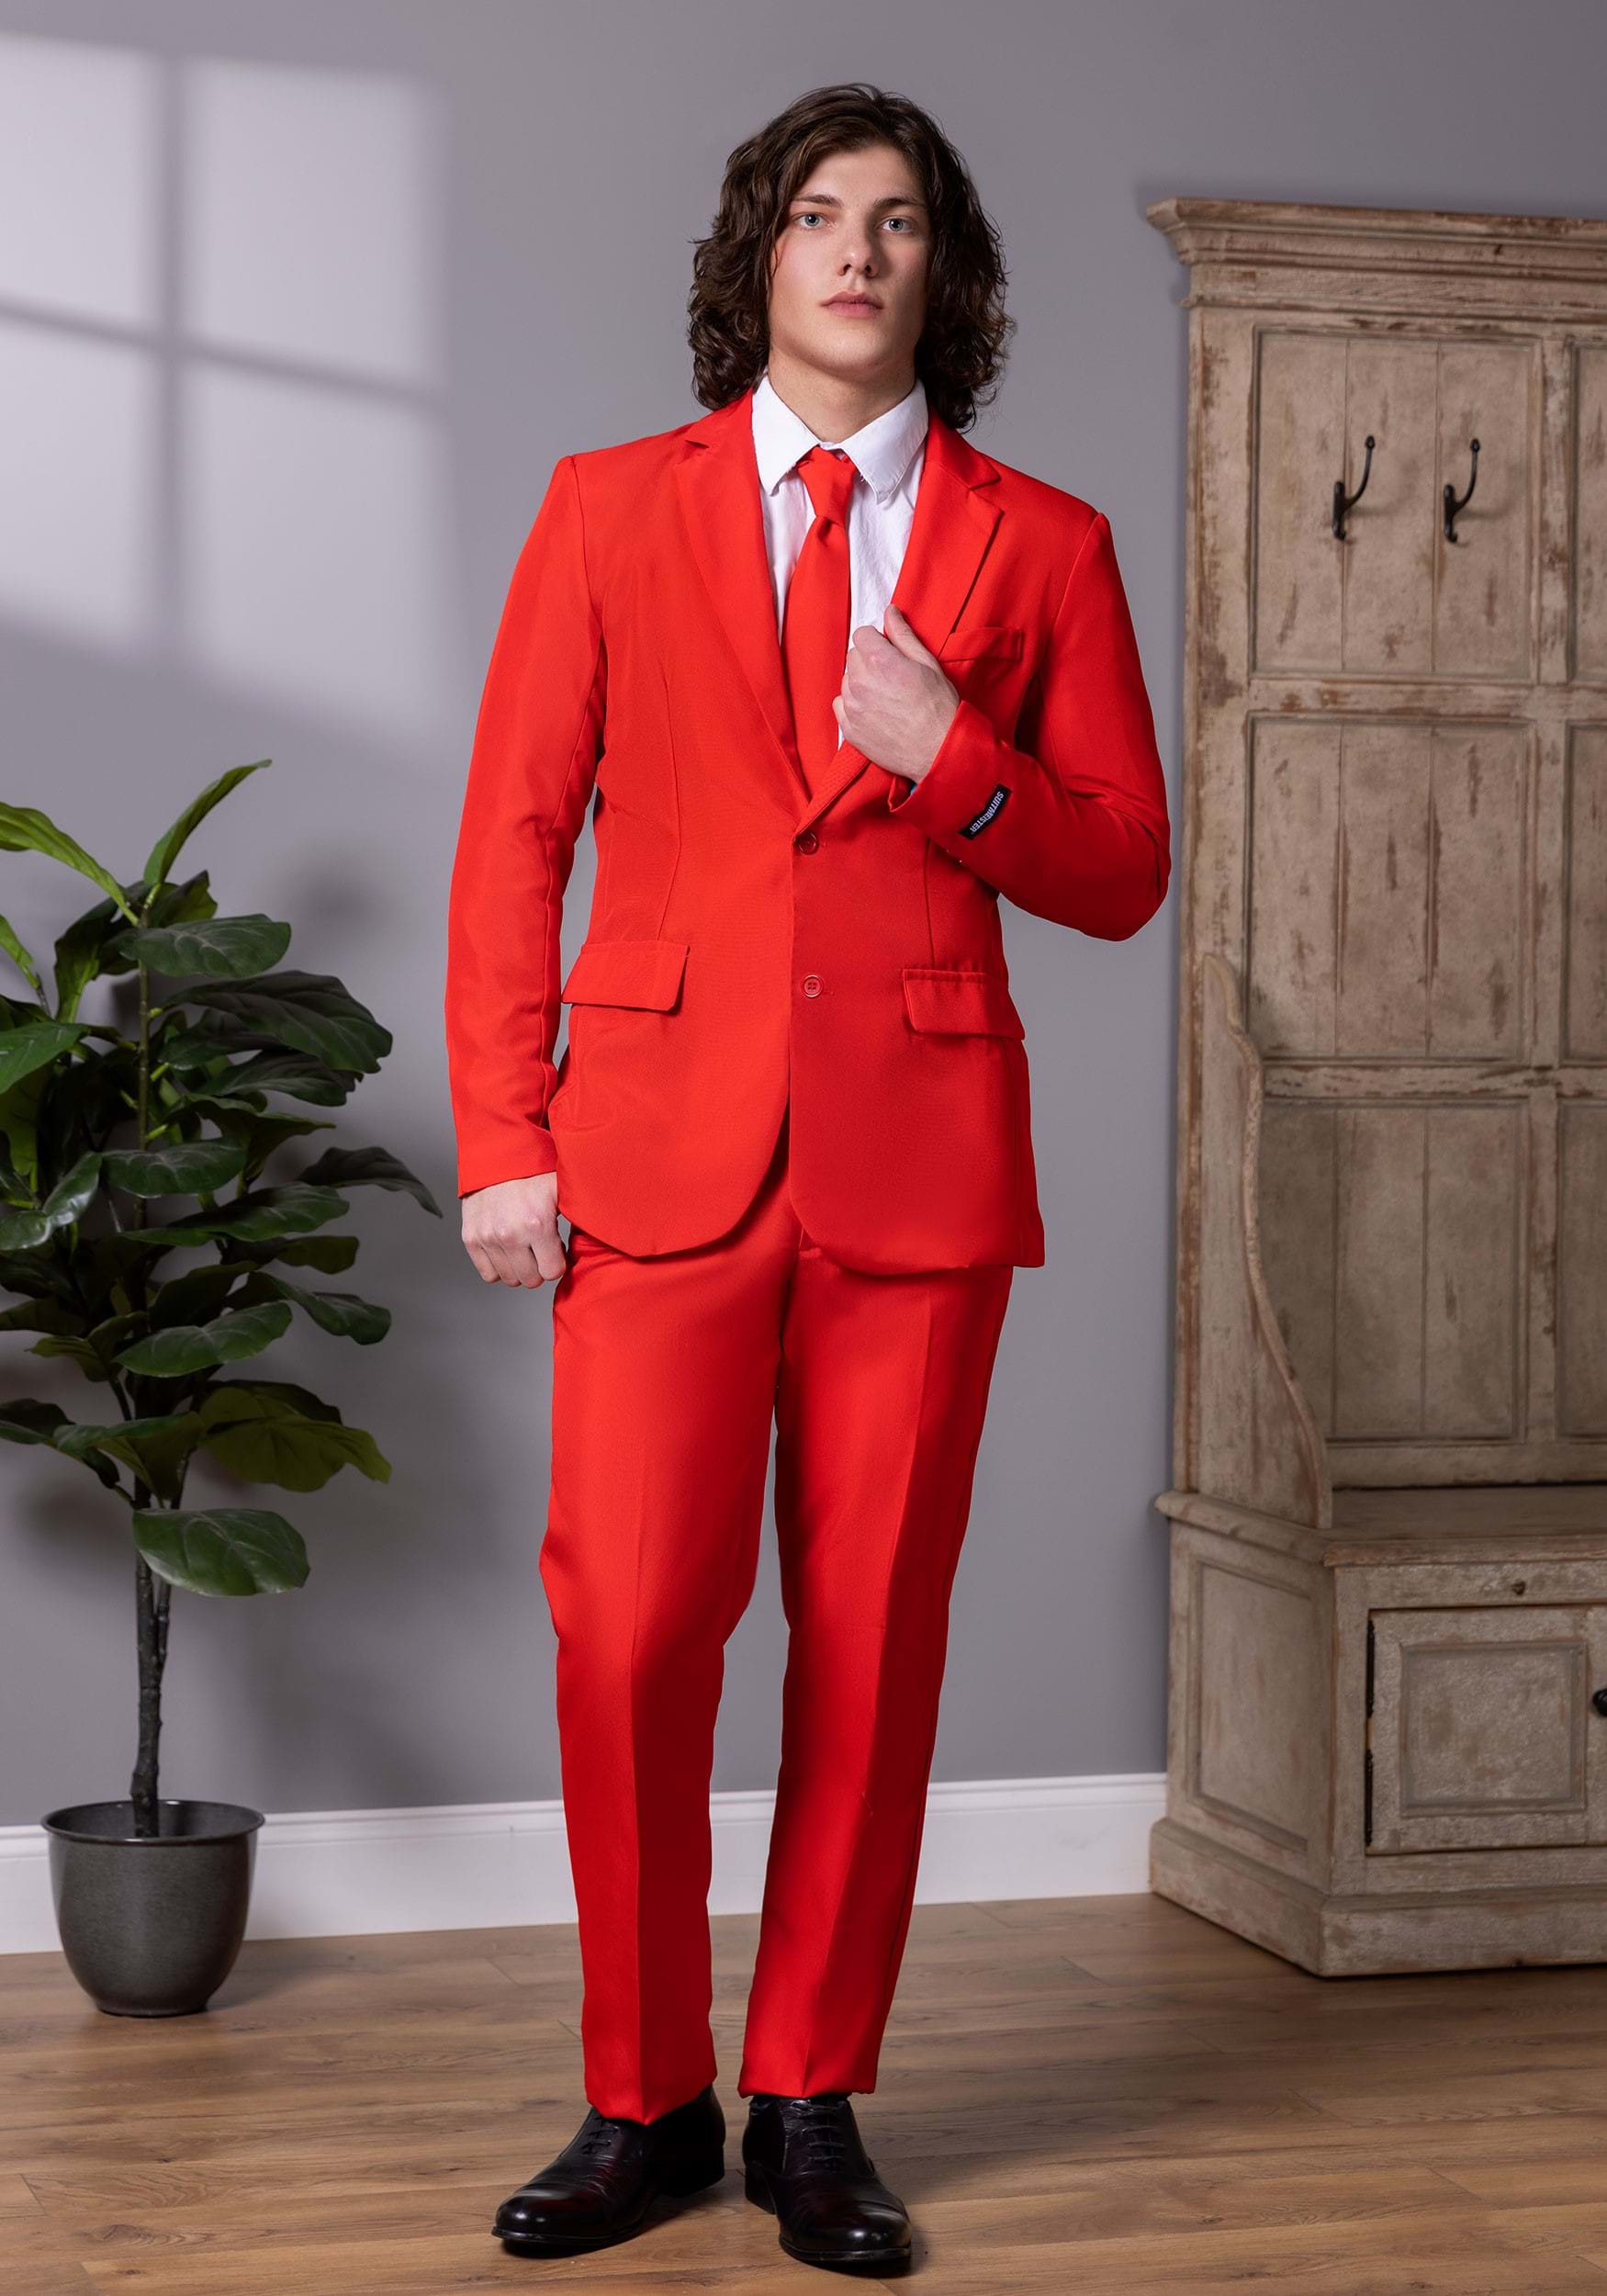 Suitmeister Mens Solid Red Suit